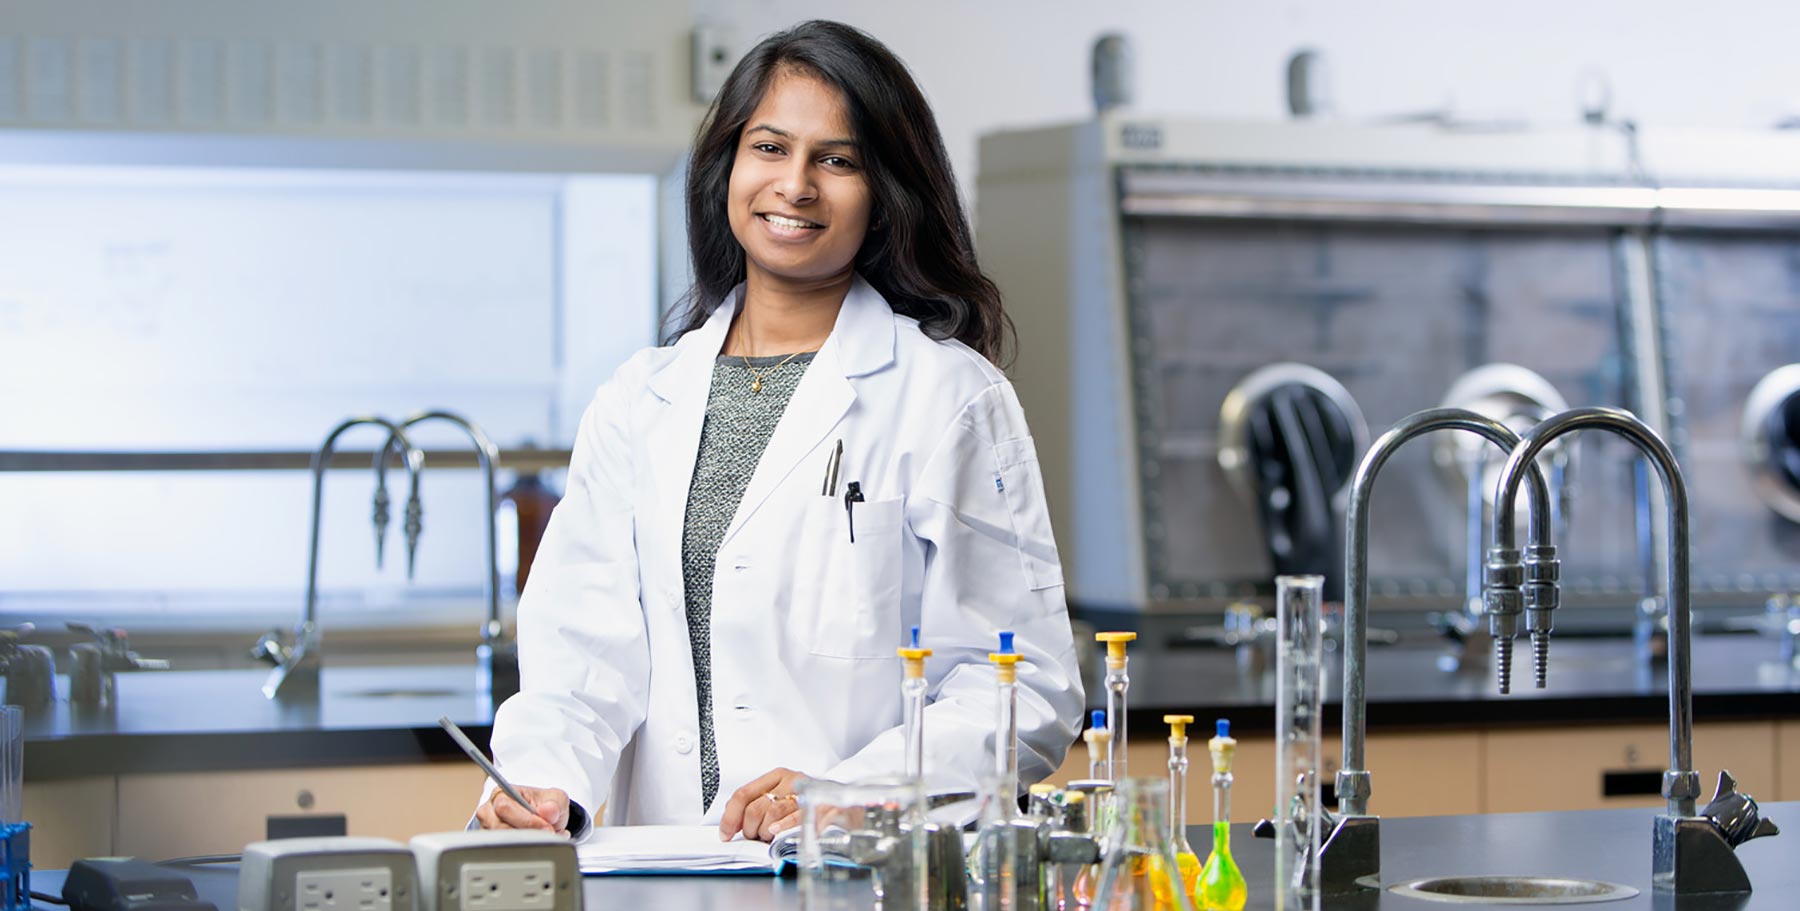 A woman in a white lab coat stands behind her lab workstation